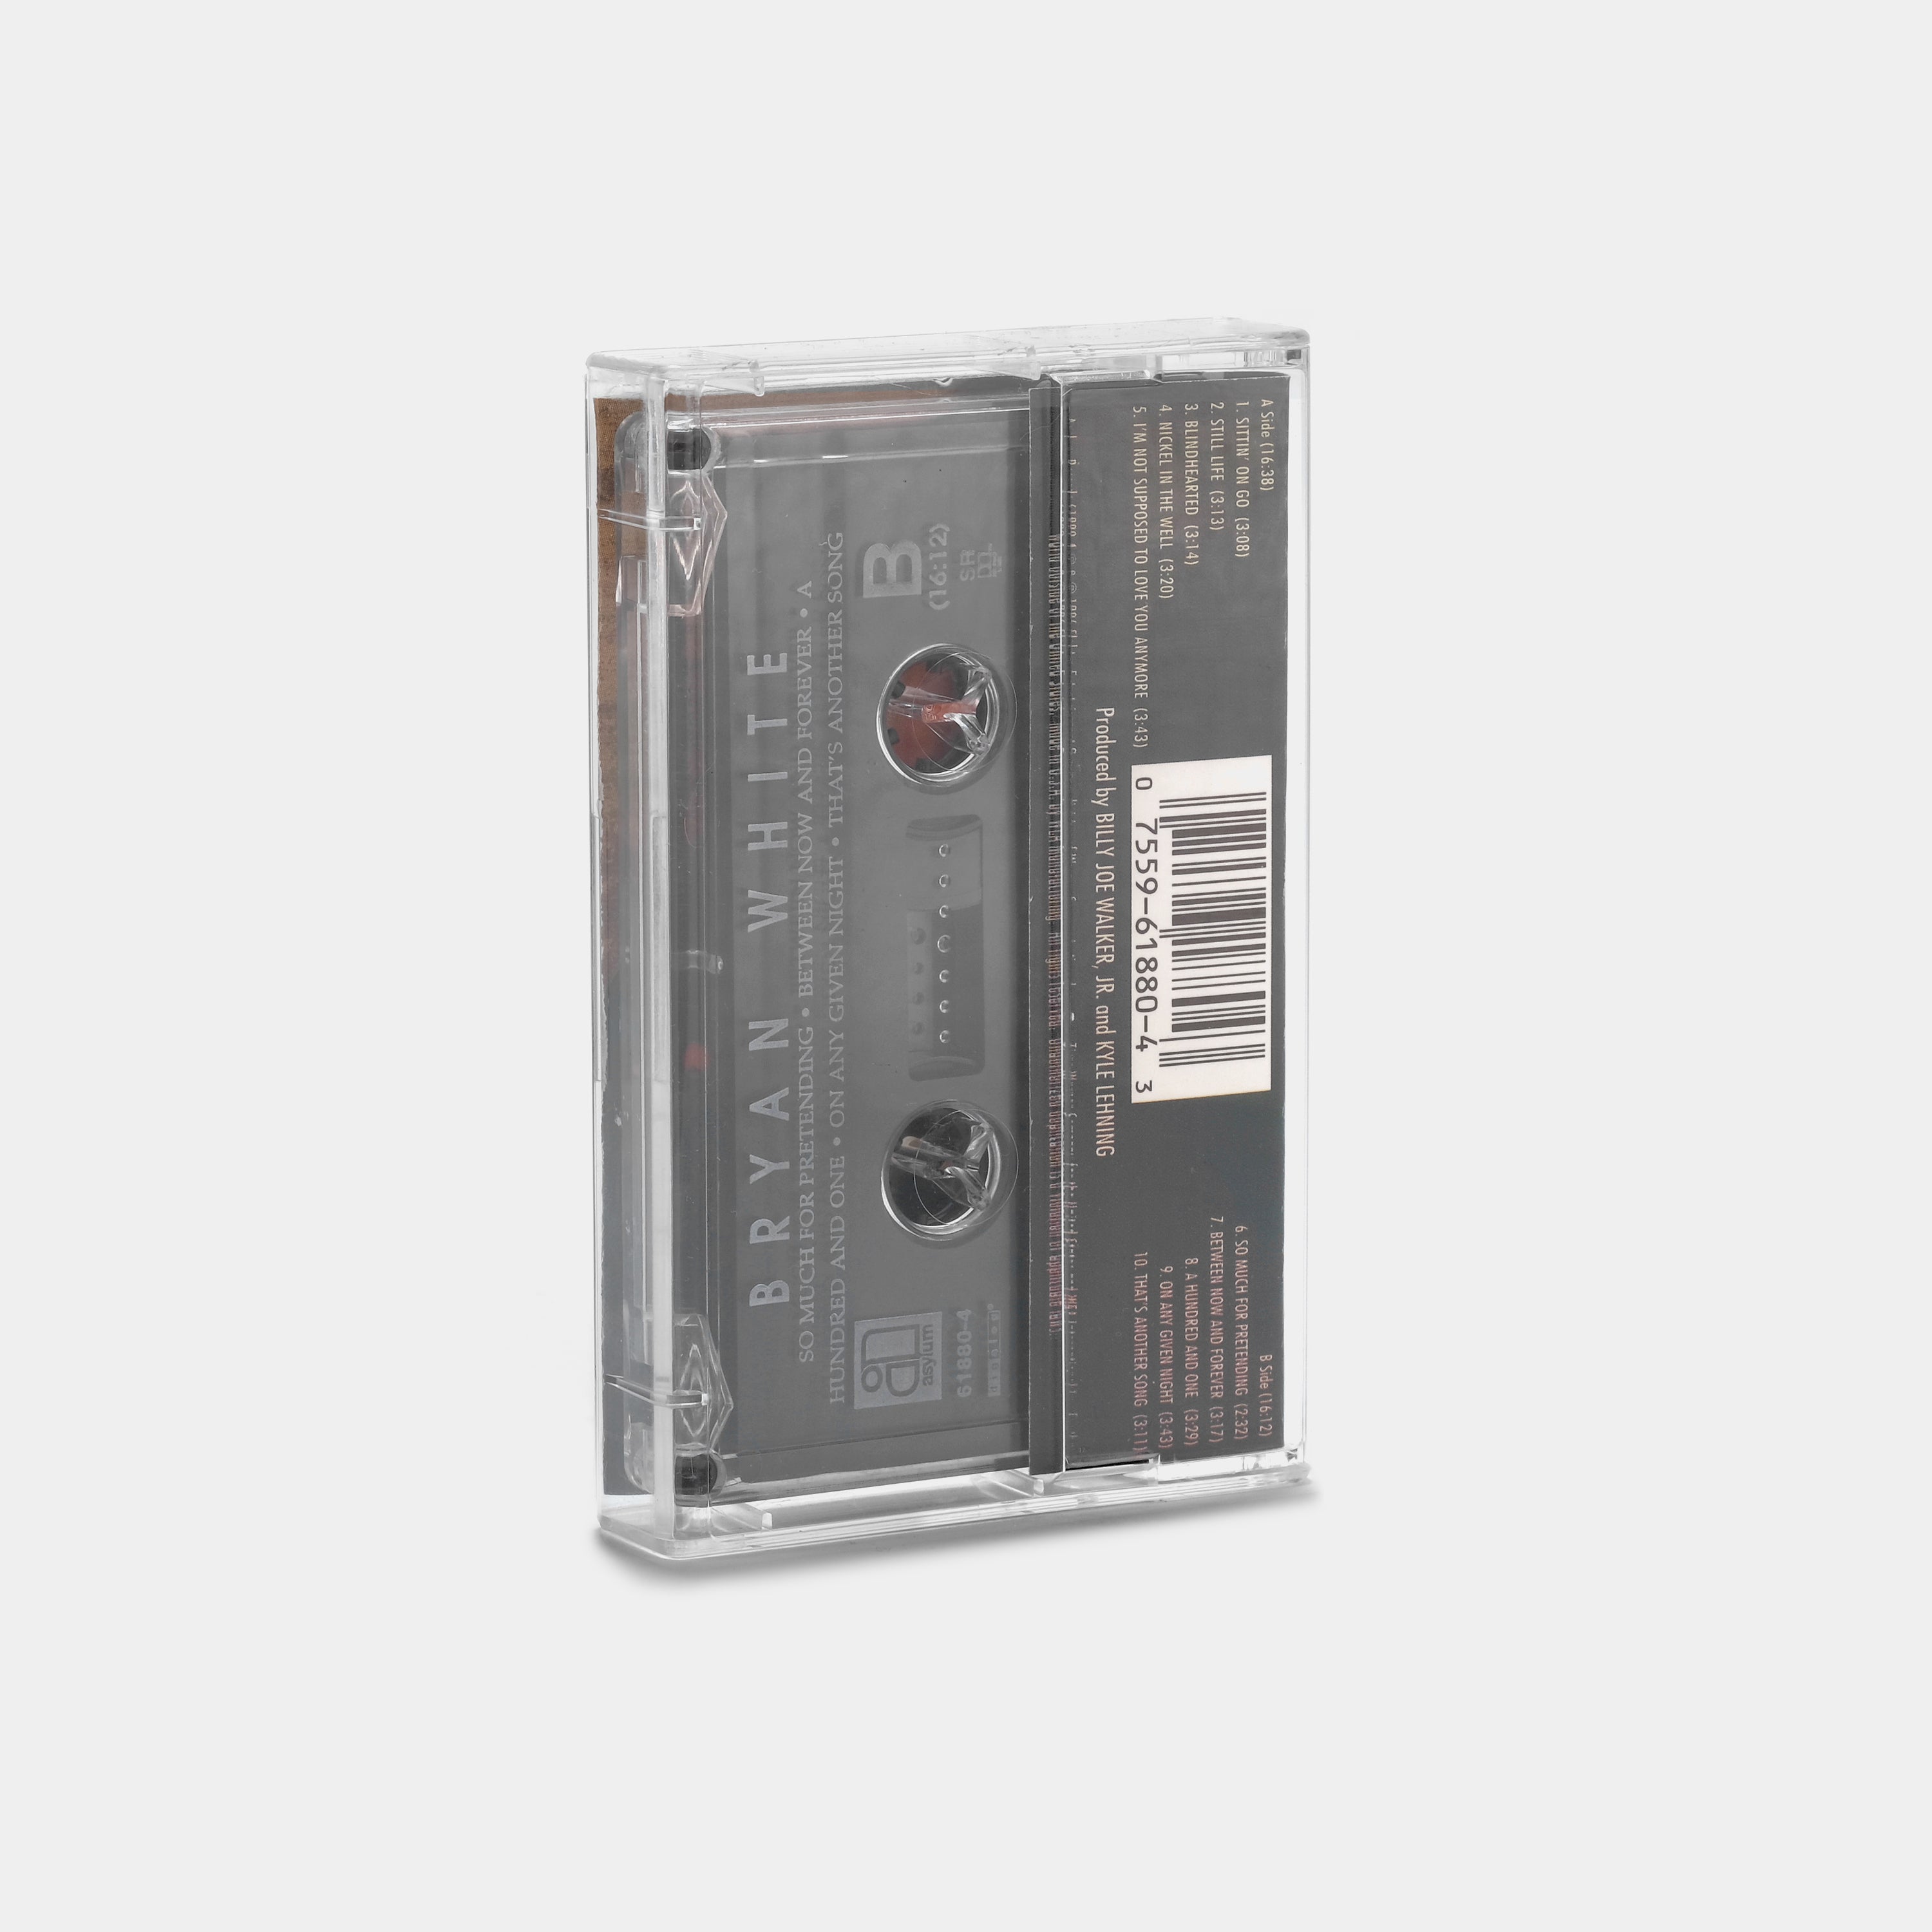 Bryan White - Between Now And Forever Cassette Tape